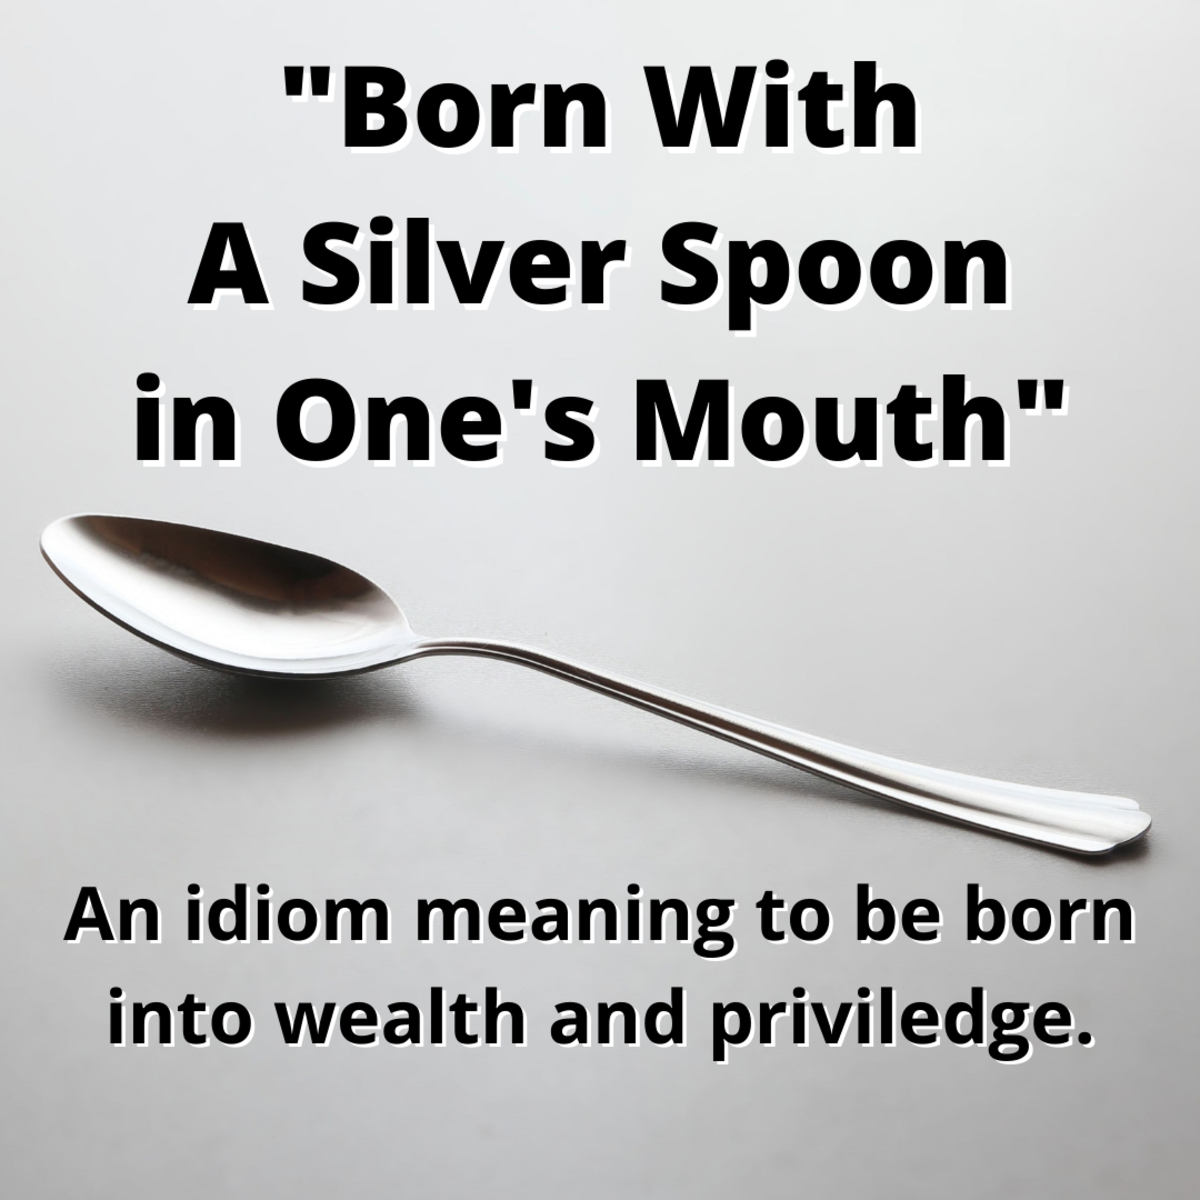 20-money-idioms-explained-to-english-as-a-second-language-learners